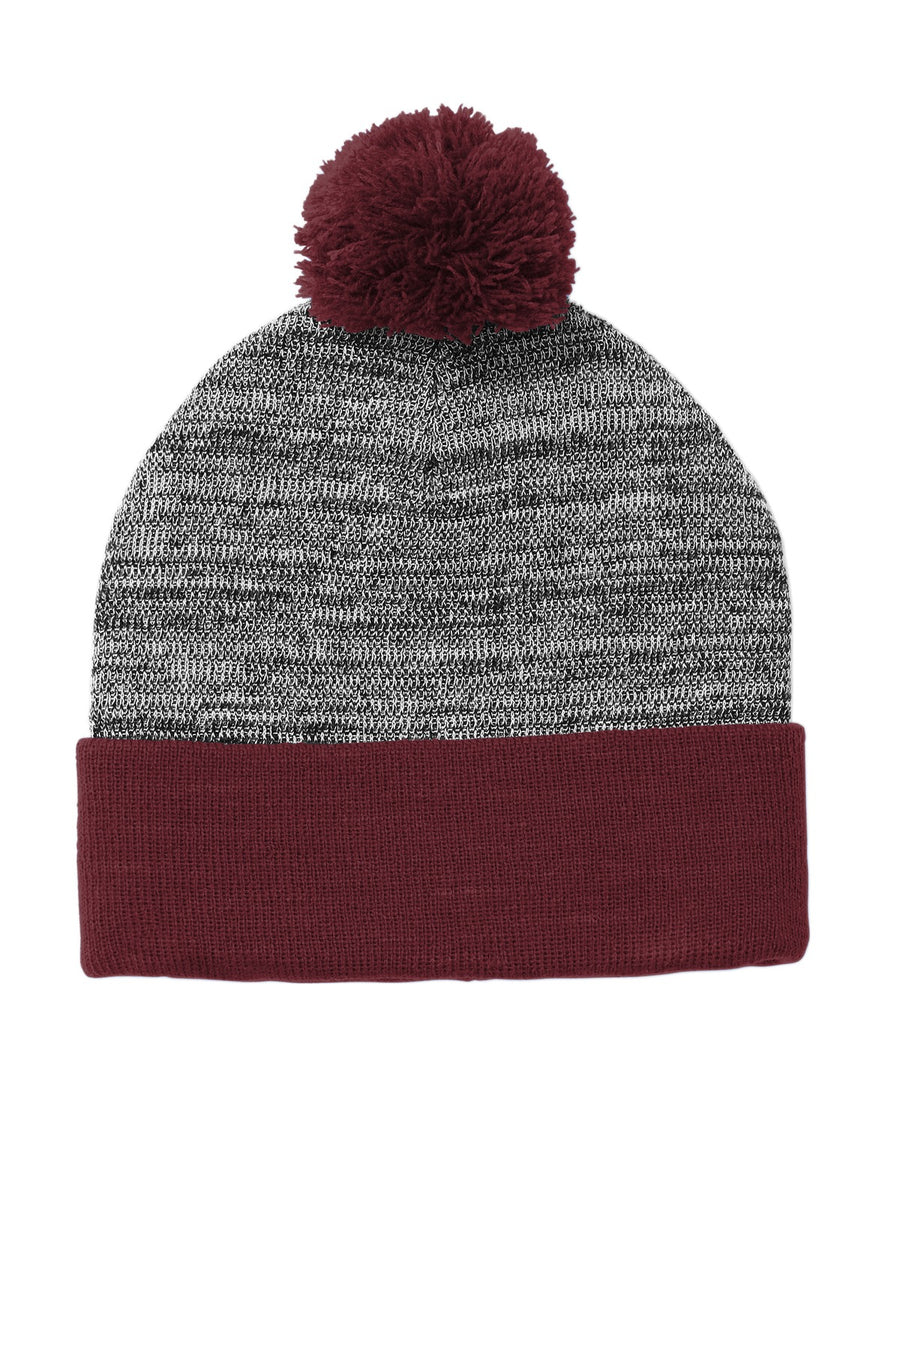 STC41-Maroon/ Grey Heather-front_model